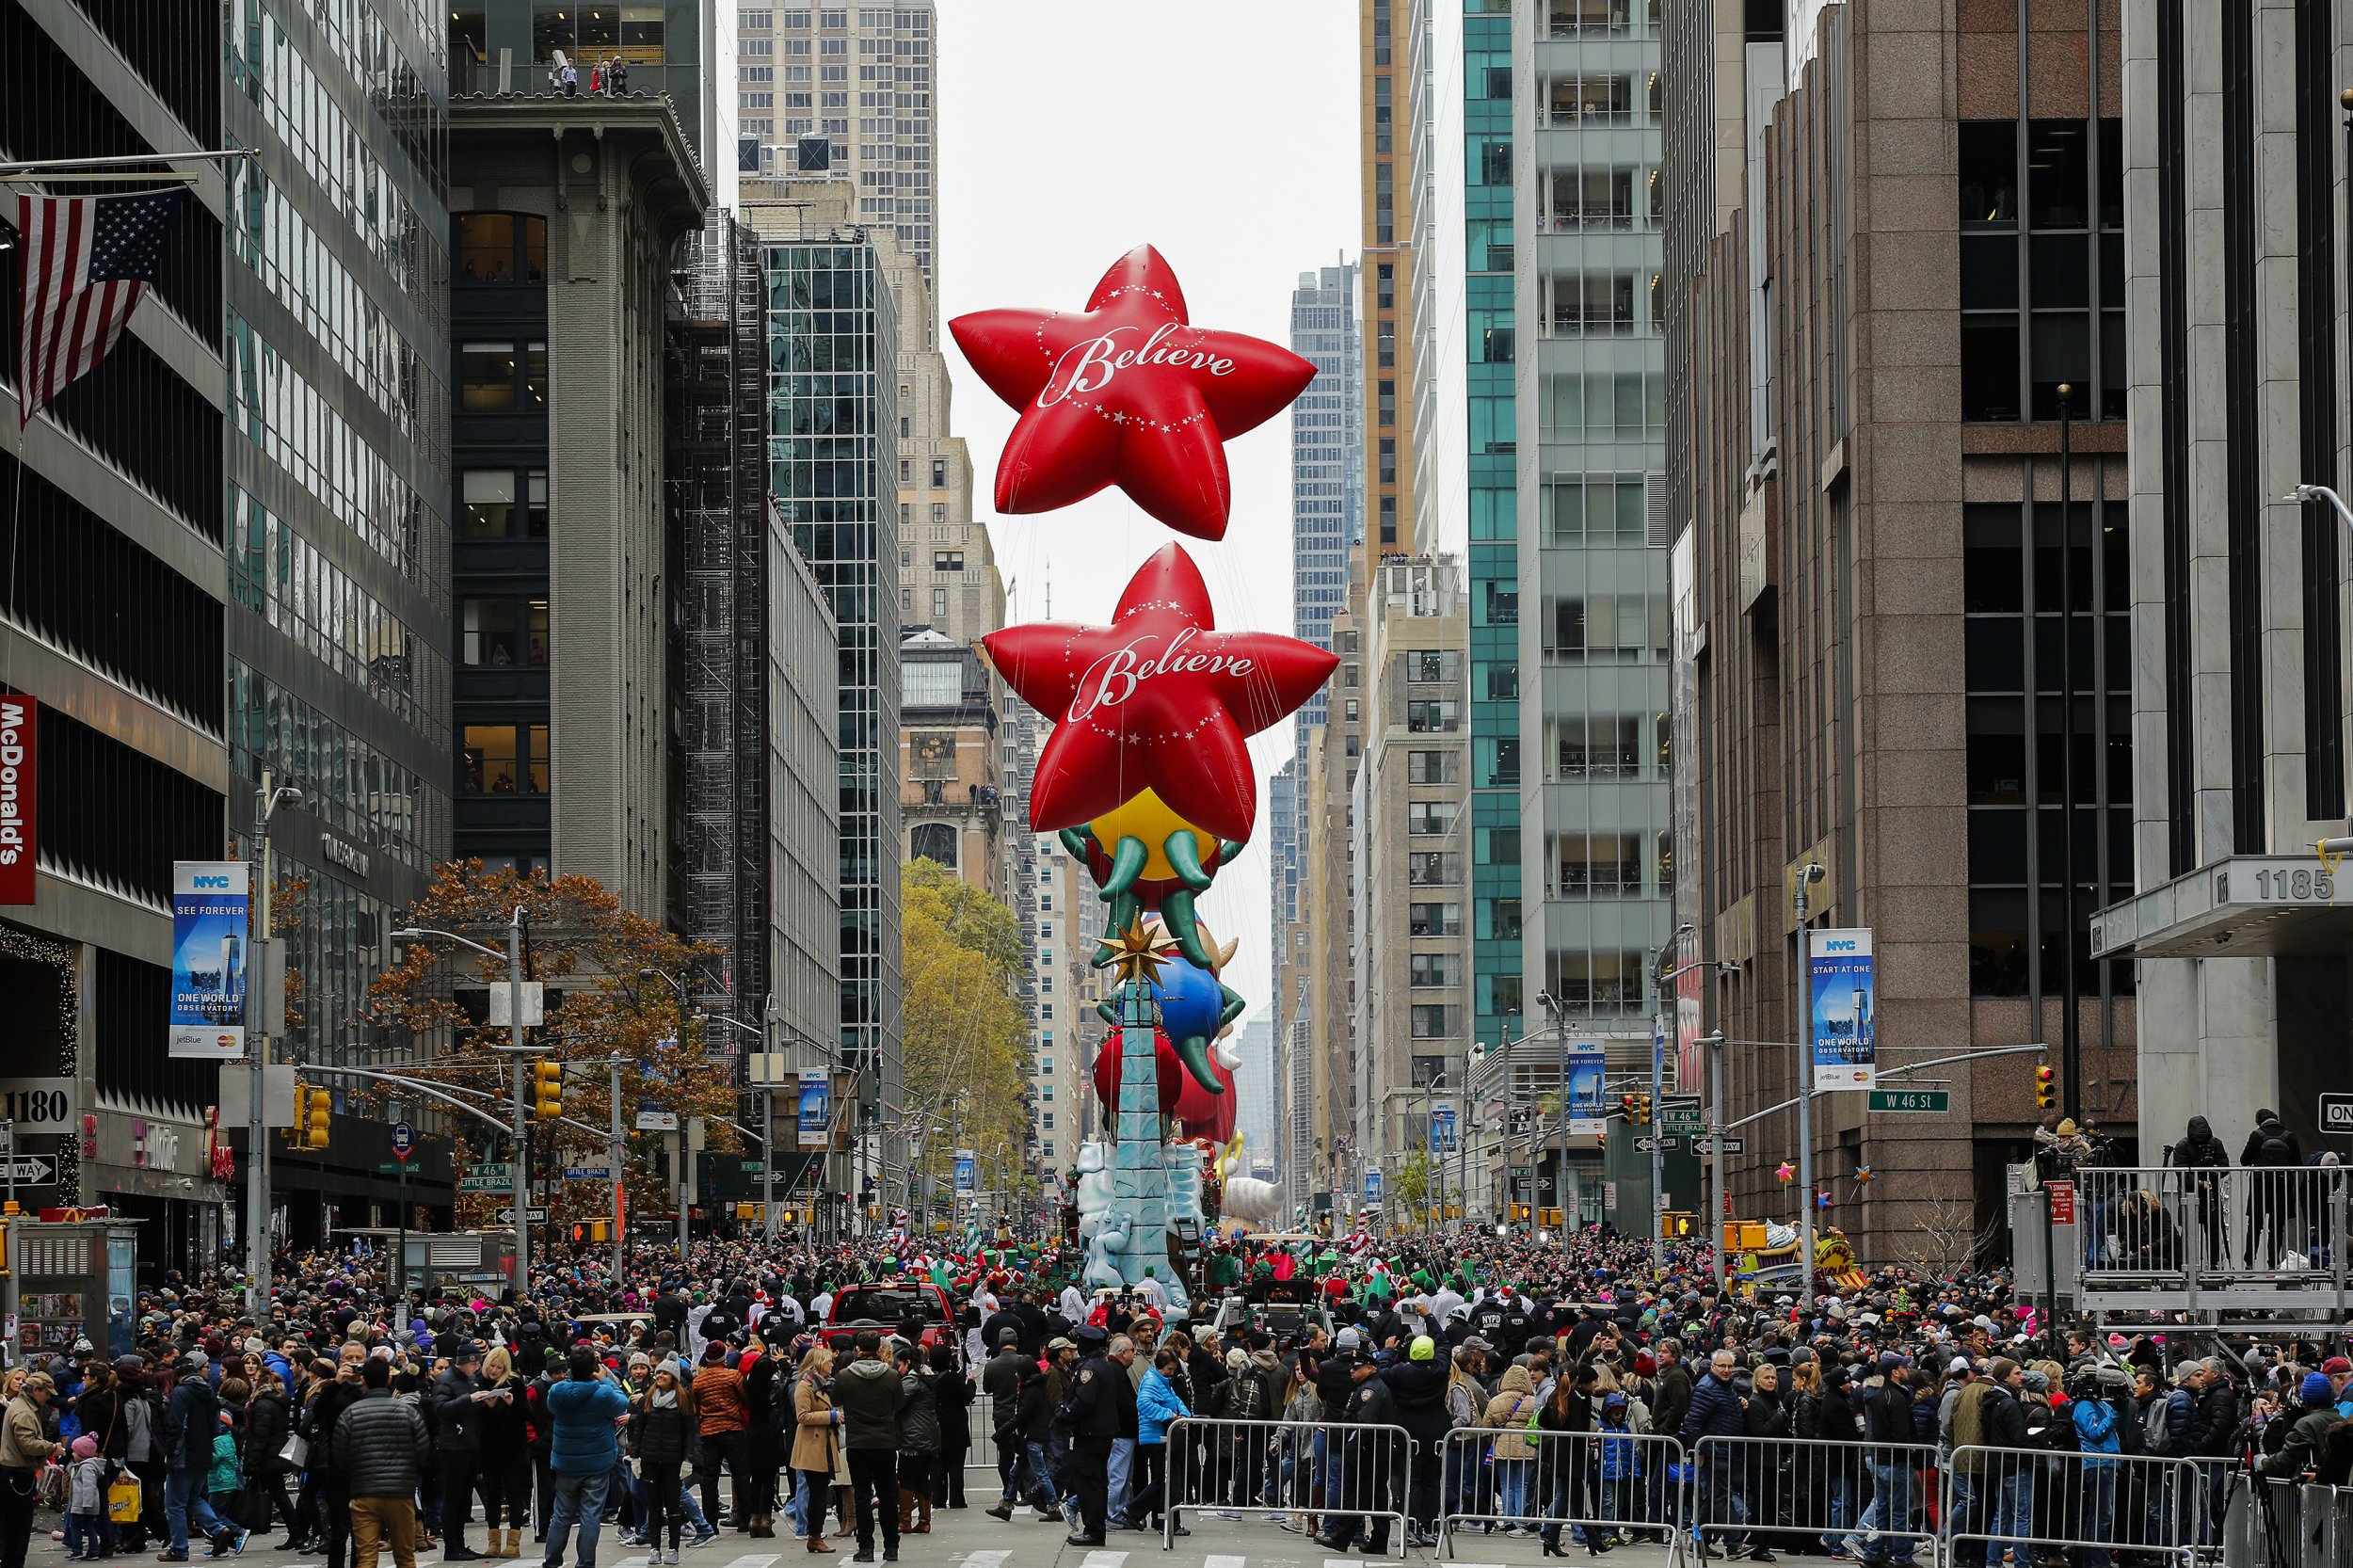 How To Get Tickets To Macy’s Thanksgiving Day Parade 2017 IBTimes